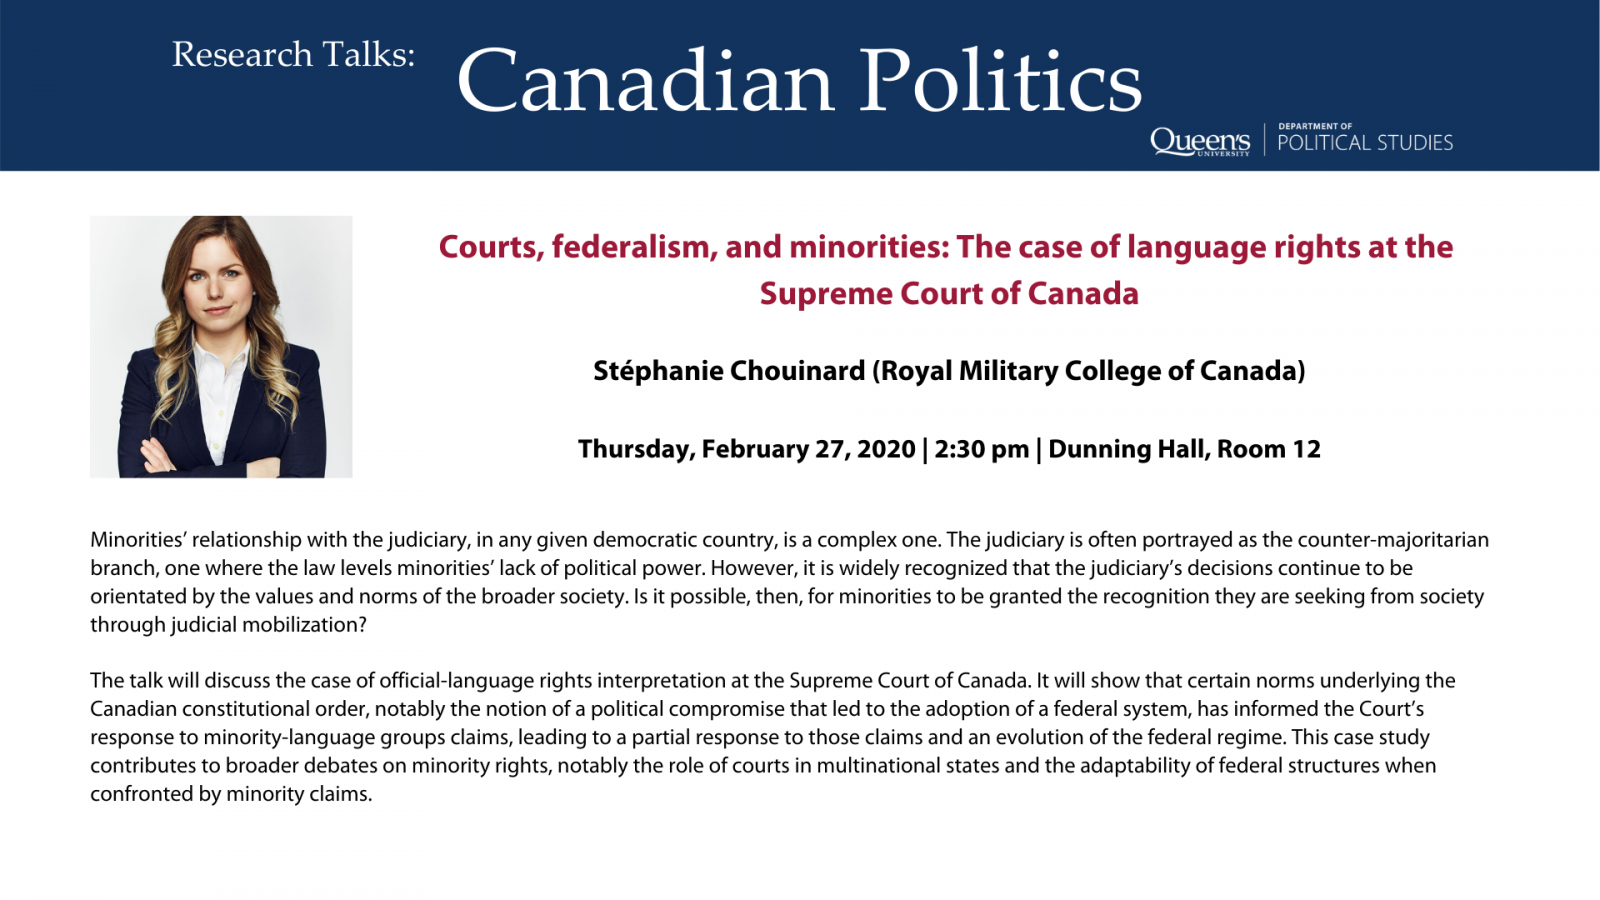 Courts, federalism and minorities: The case of language rights at the Supreme Court of Canada